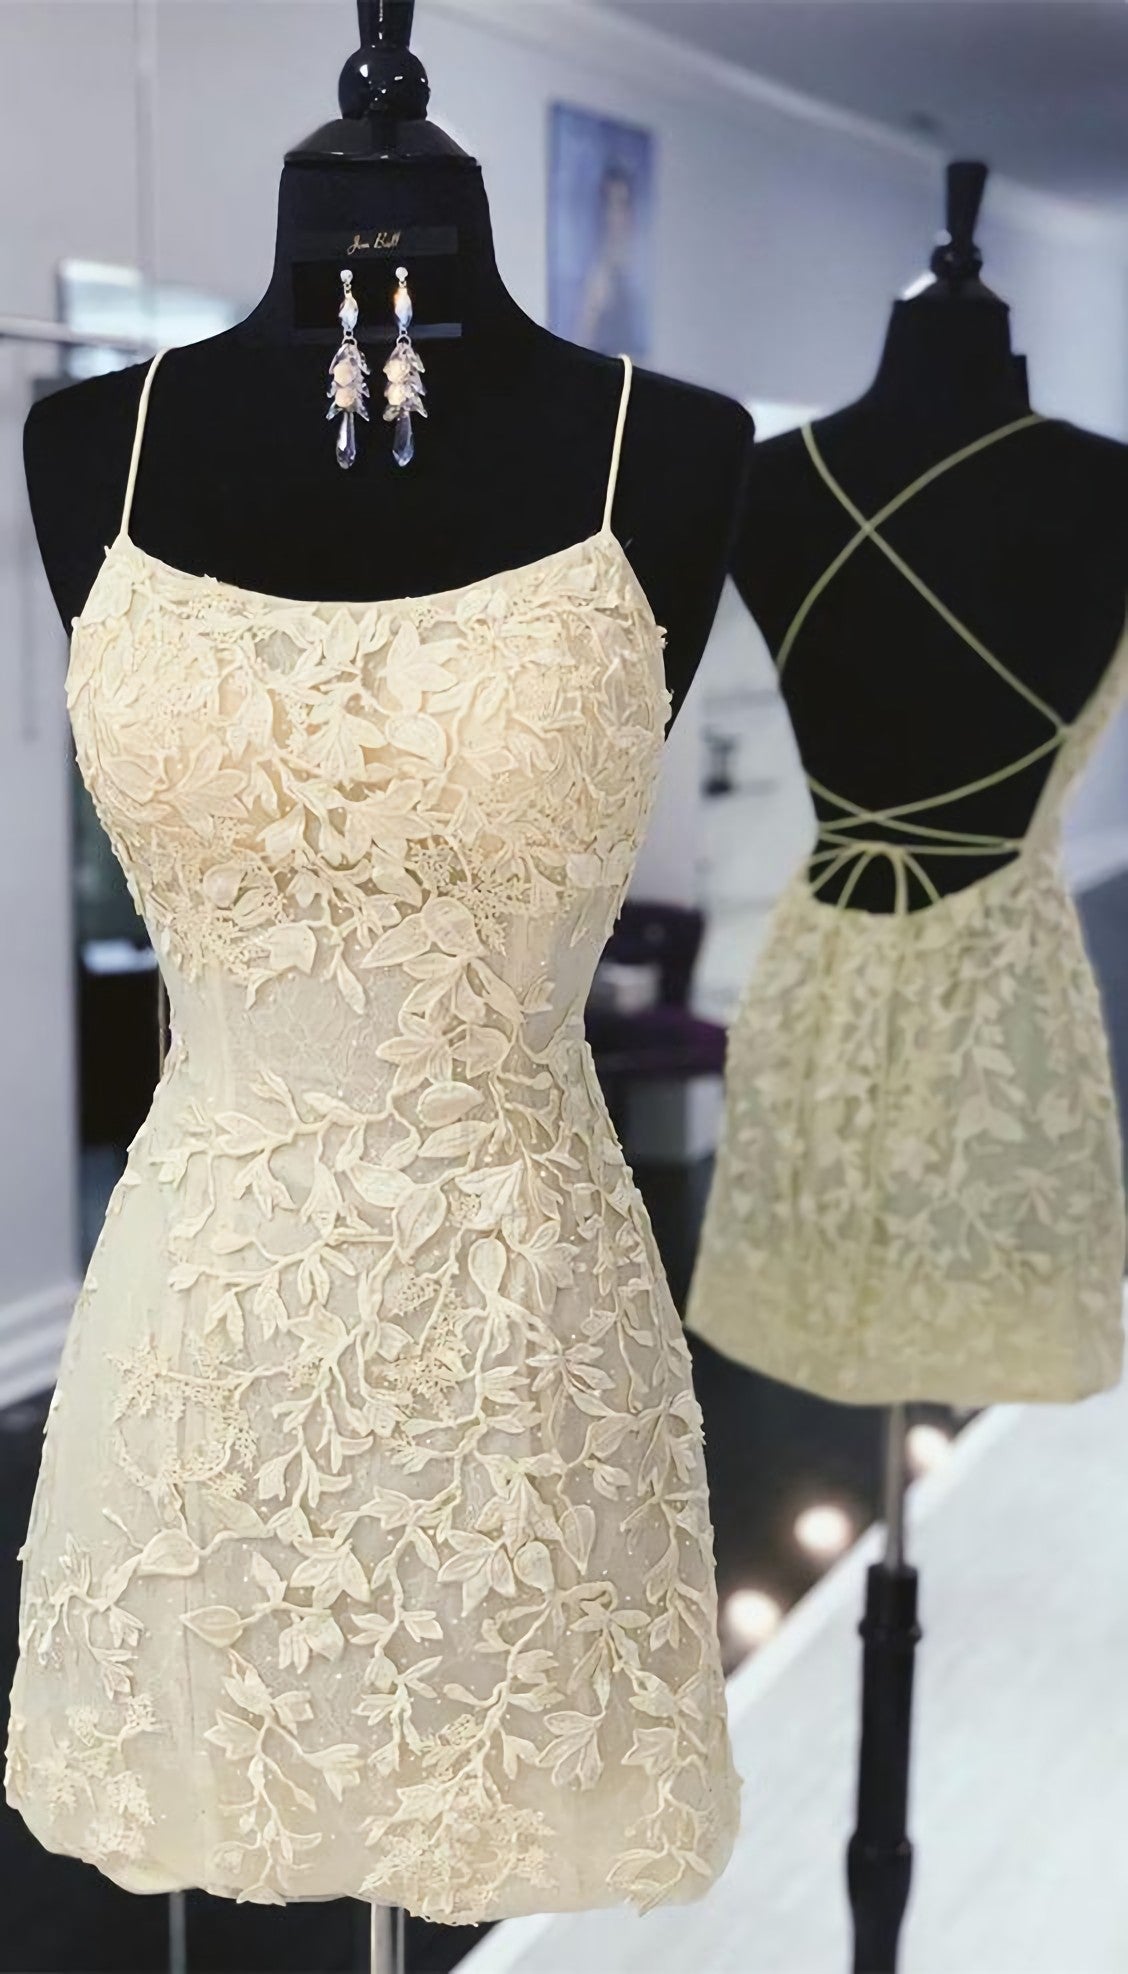 Bride Dress, Tight Yellow Lace Homecoming Dresses, Short Yellow Homecoming Dress, With Lace Up Back